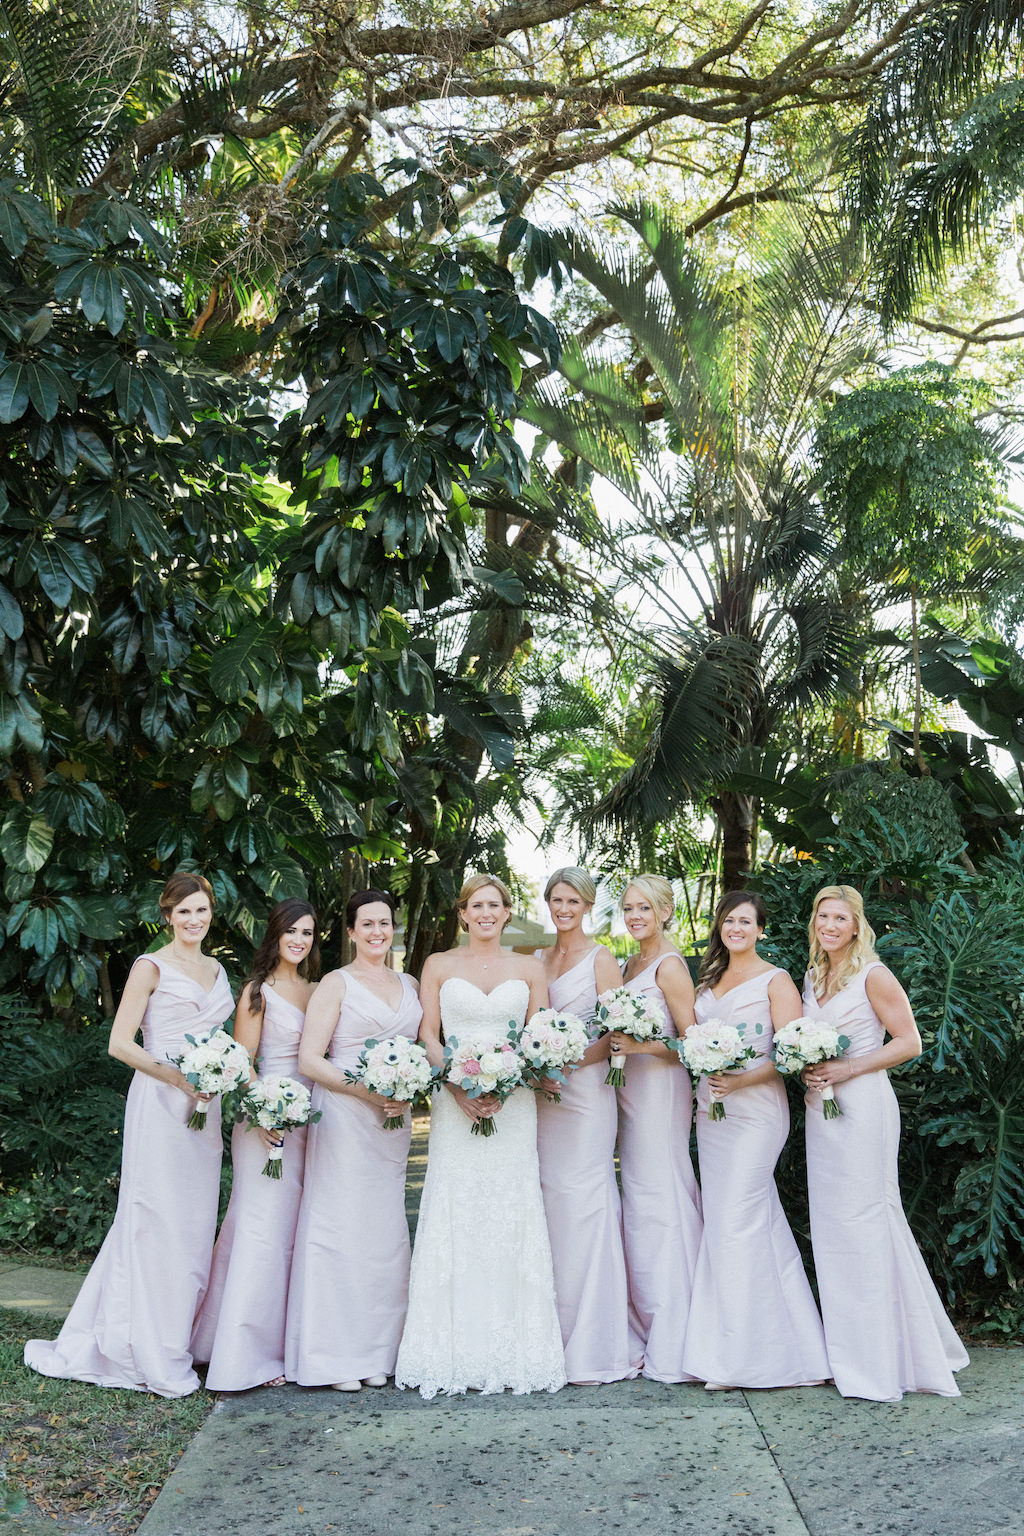 Outdoor Tropical Garden Bridal Party Portrait with Pastel Blush Floor Length Bridesmaids Dresses and White Bouquets with Greenery | St Petersburg Florida Wedding